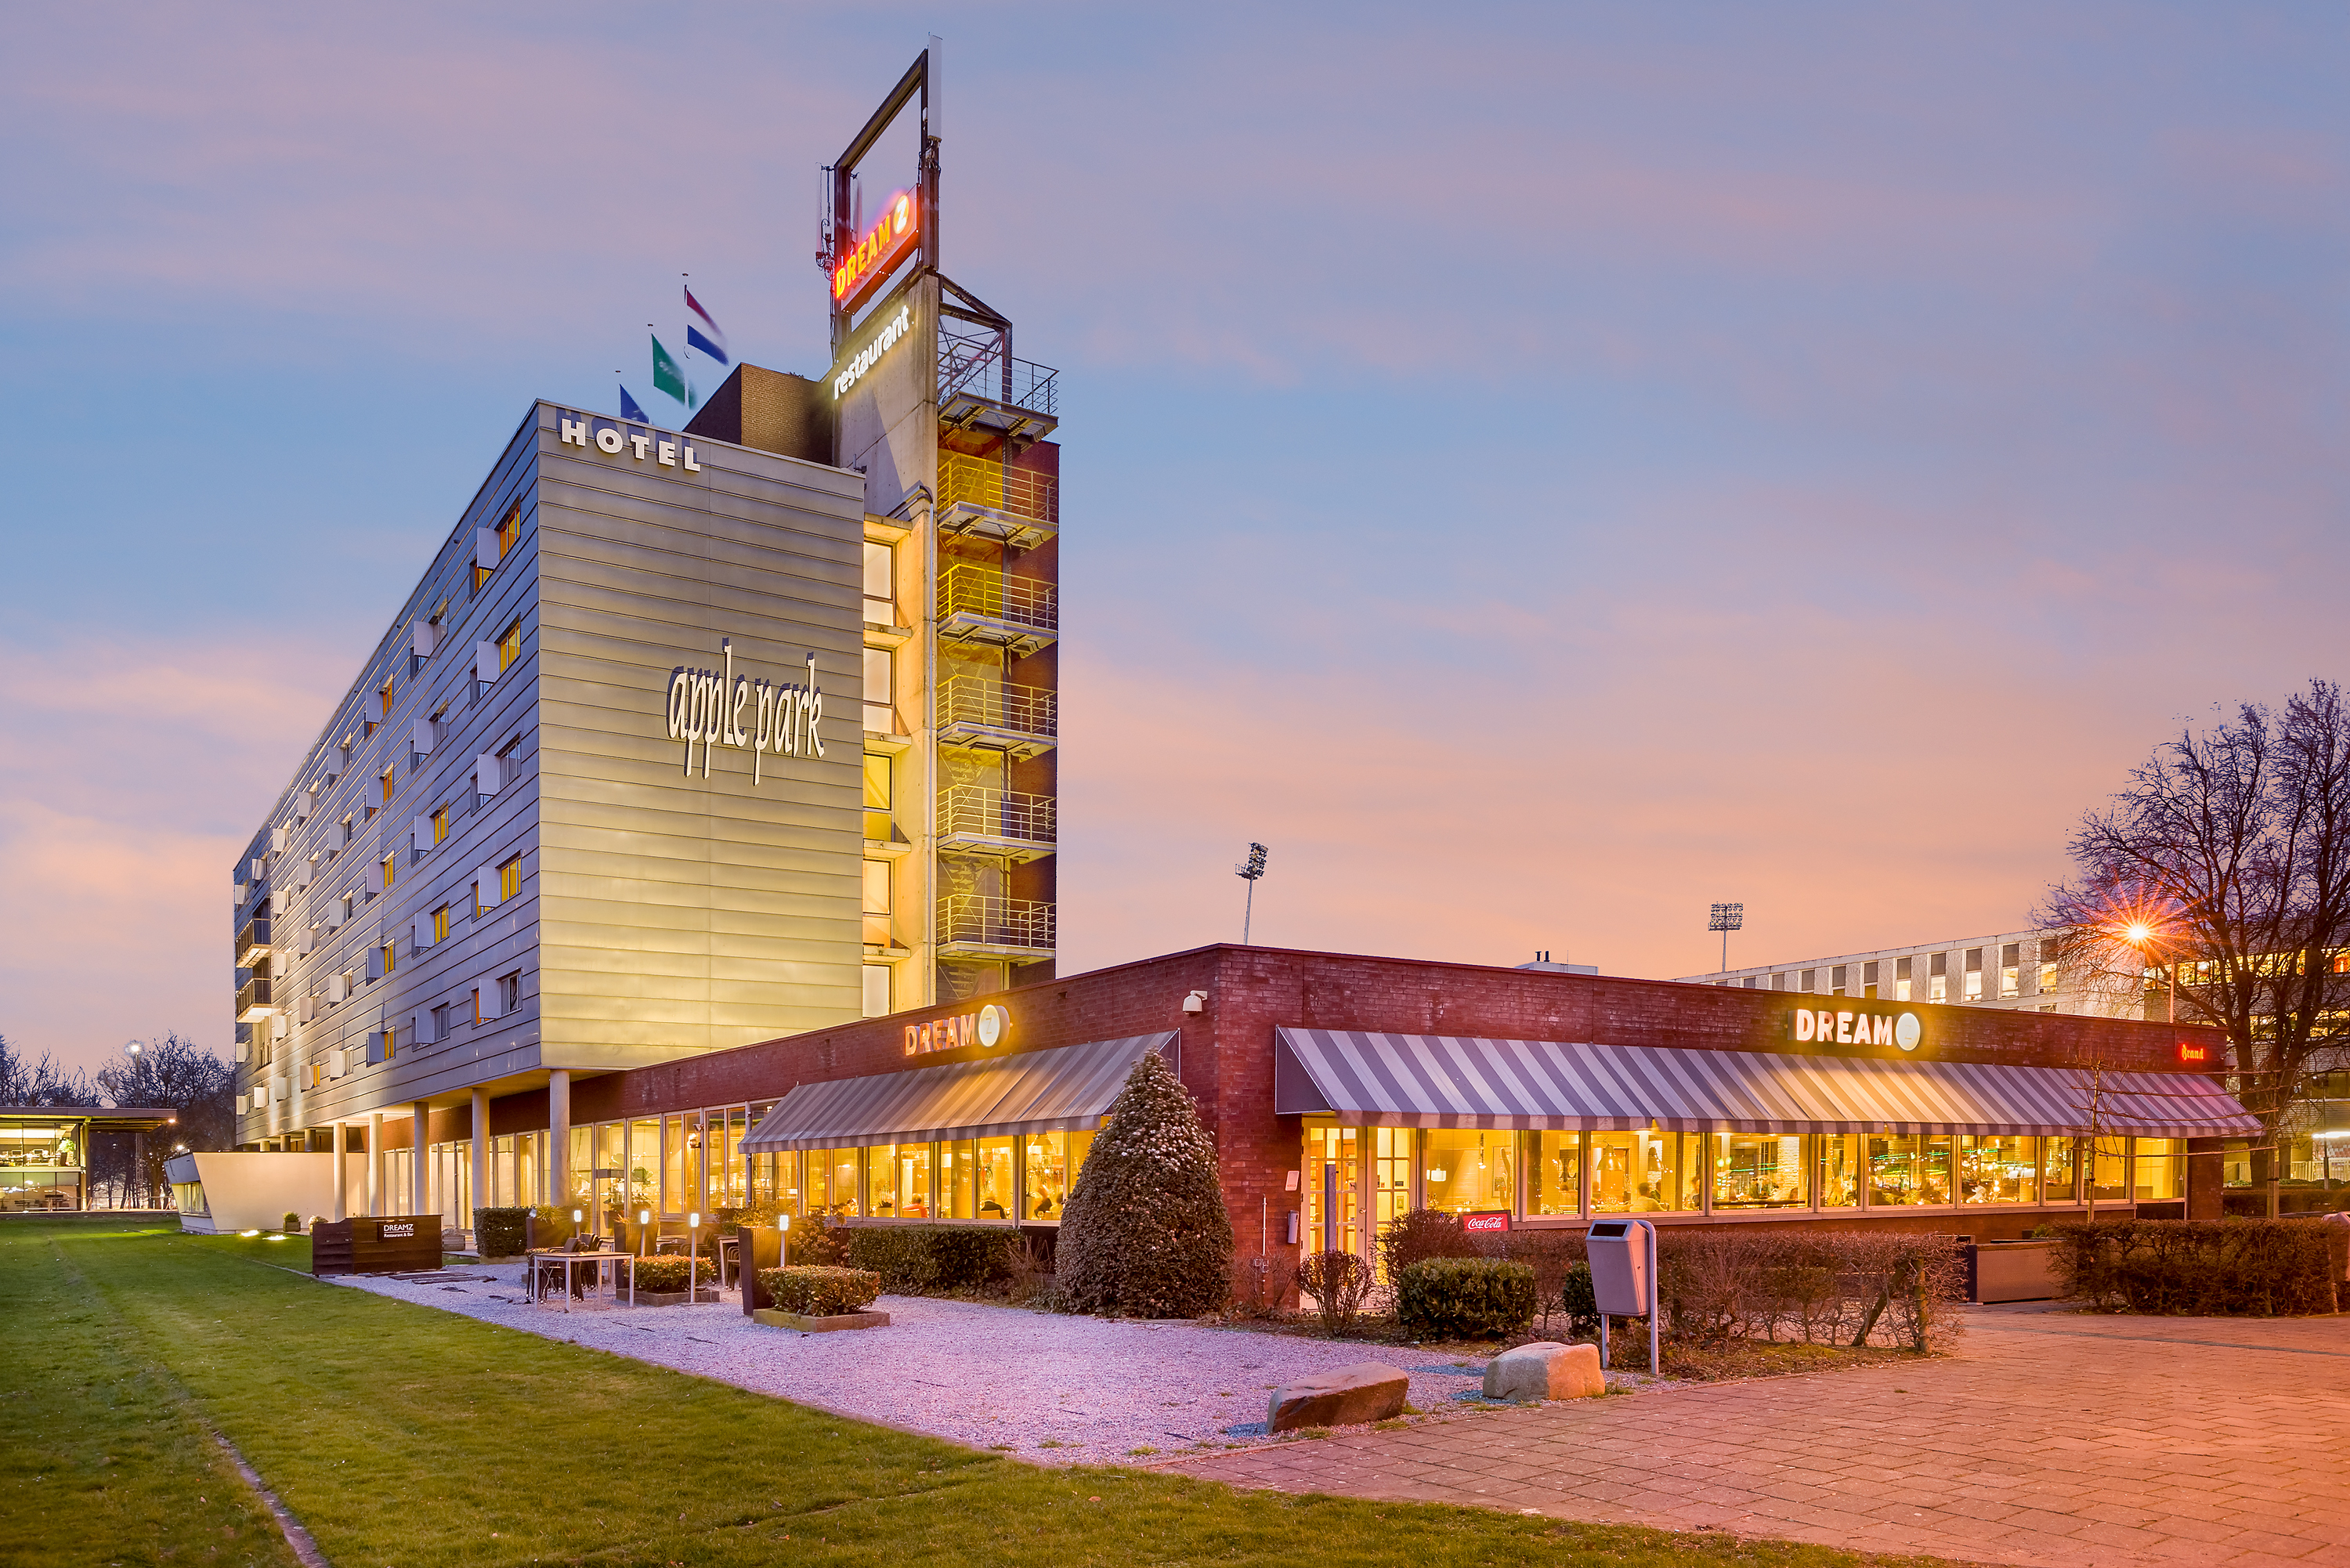 Select Hotel Apple Park Maastricht <br/>59.00 ew <br/> <a href='http://vakantieoplossing.nl/outpage/?id=462d6b9d16dfe492cfd688b4065af2f1' target='_blank'>View Details</a>